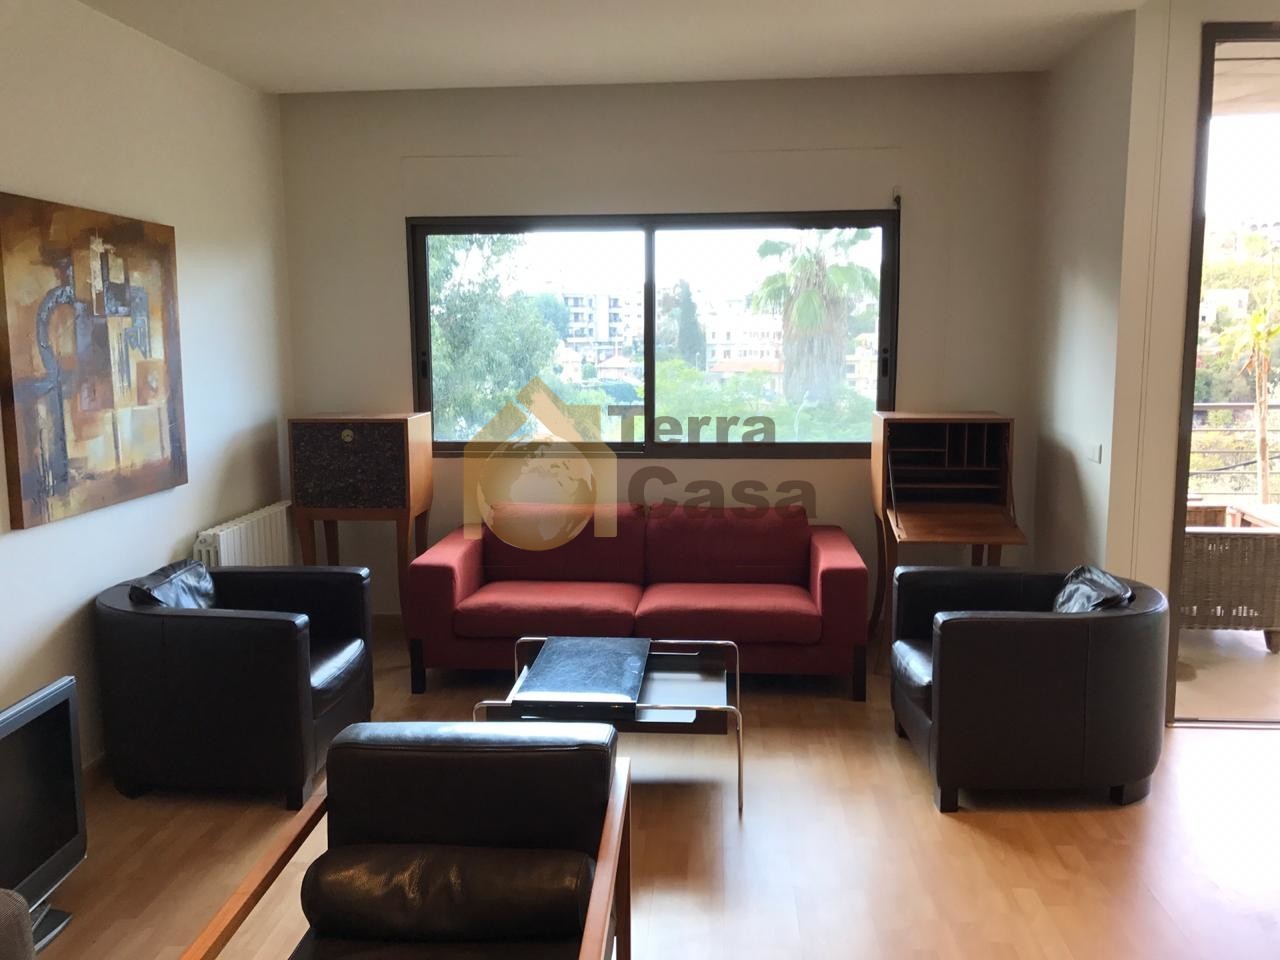 Apartment for rent in baabda fully furnished open view. Ref#1058